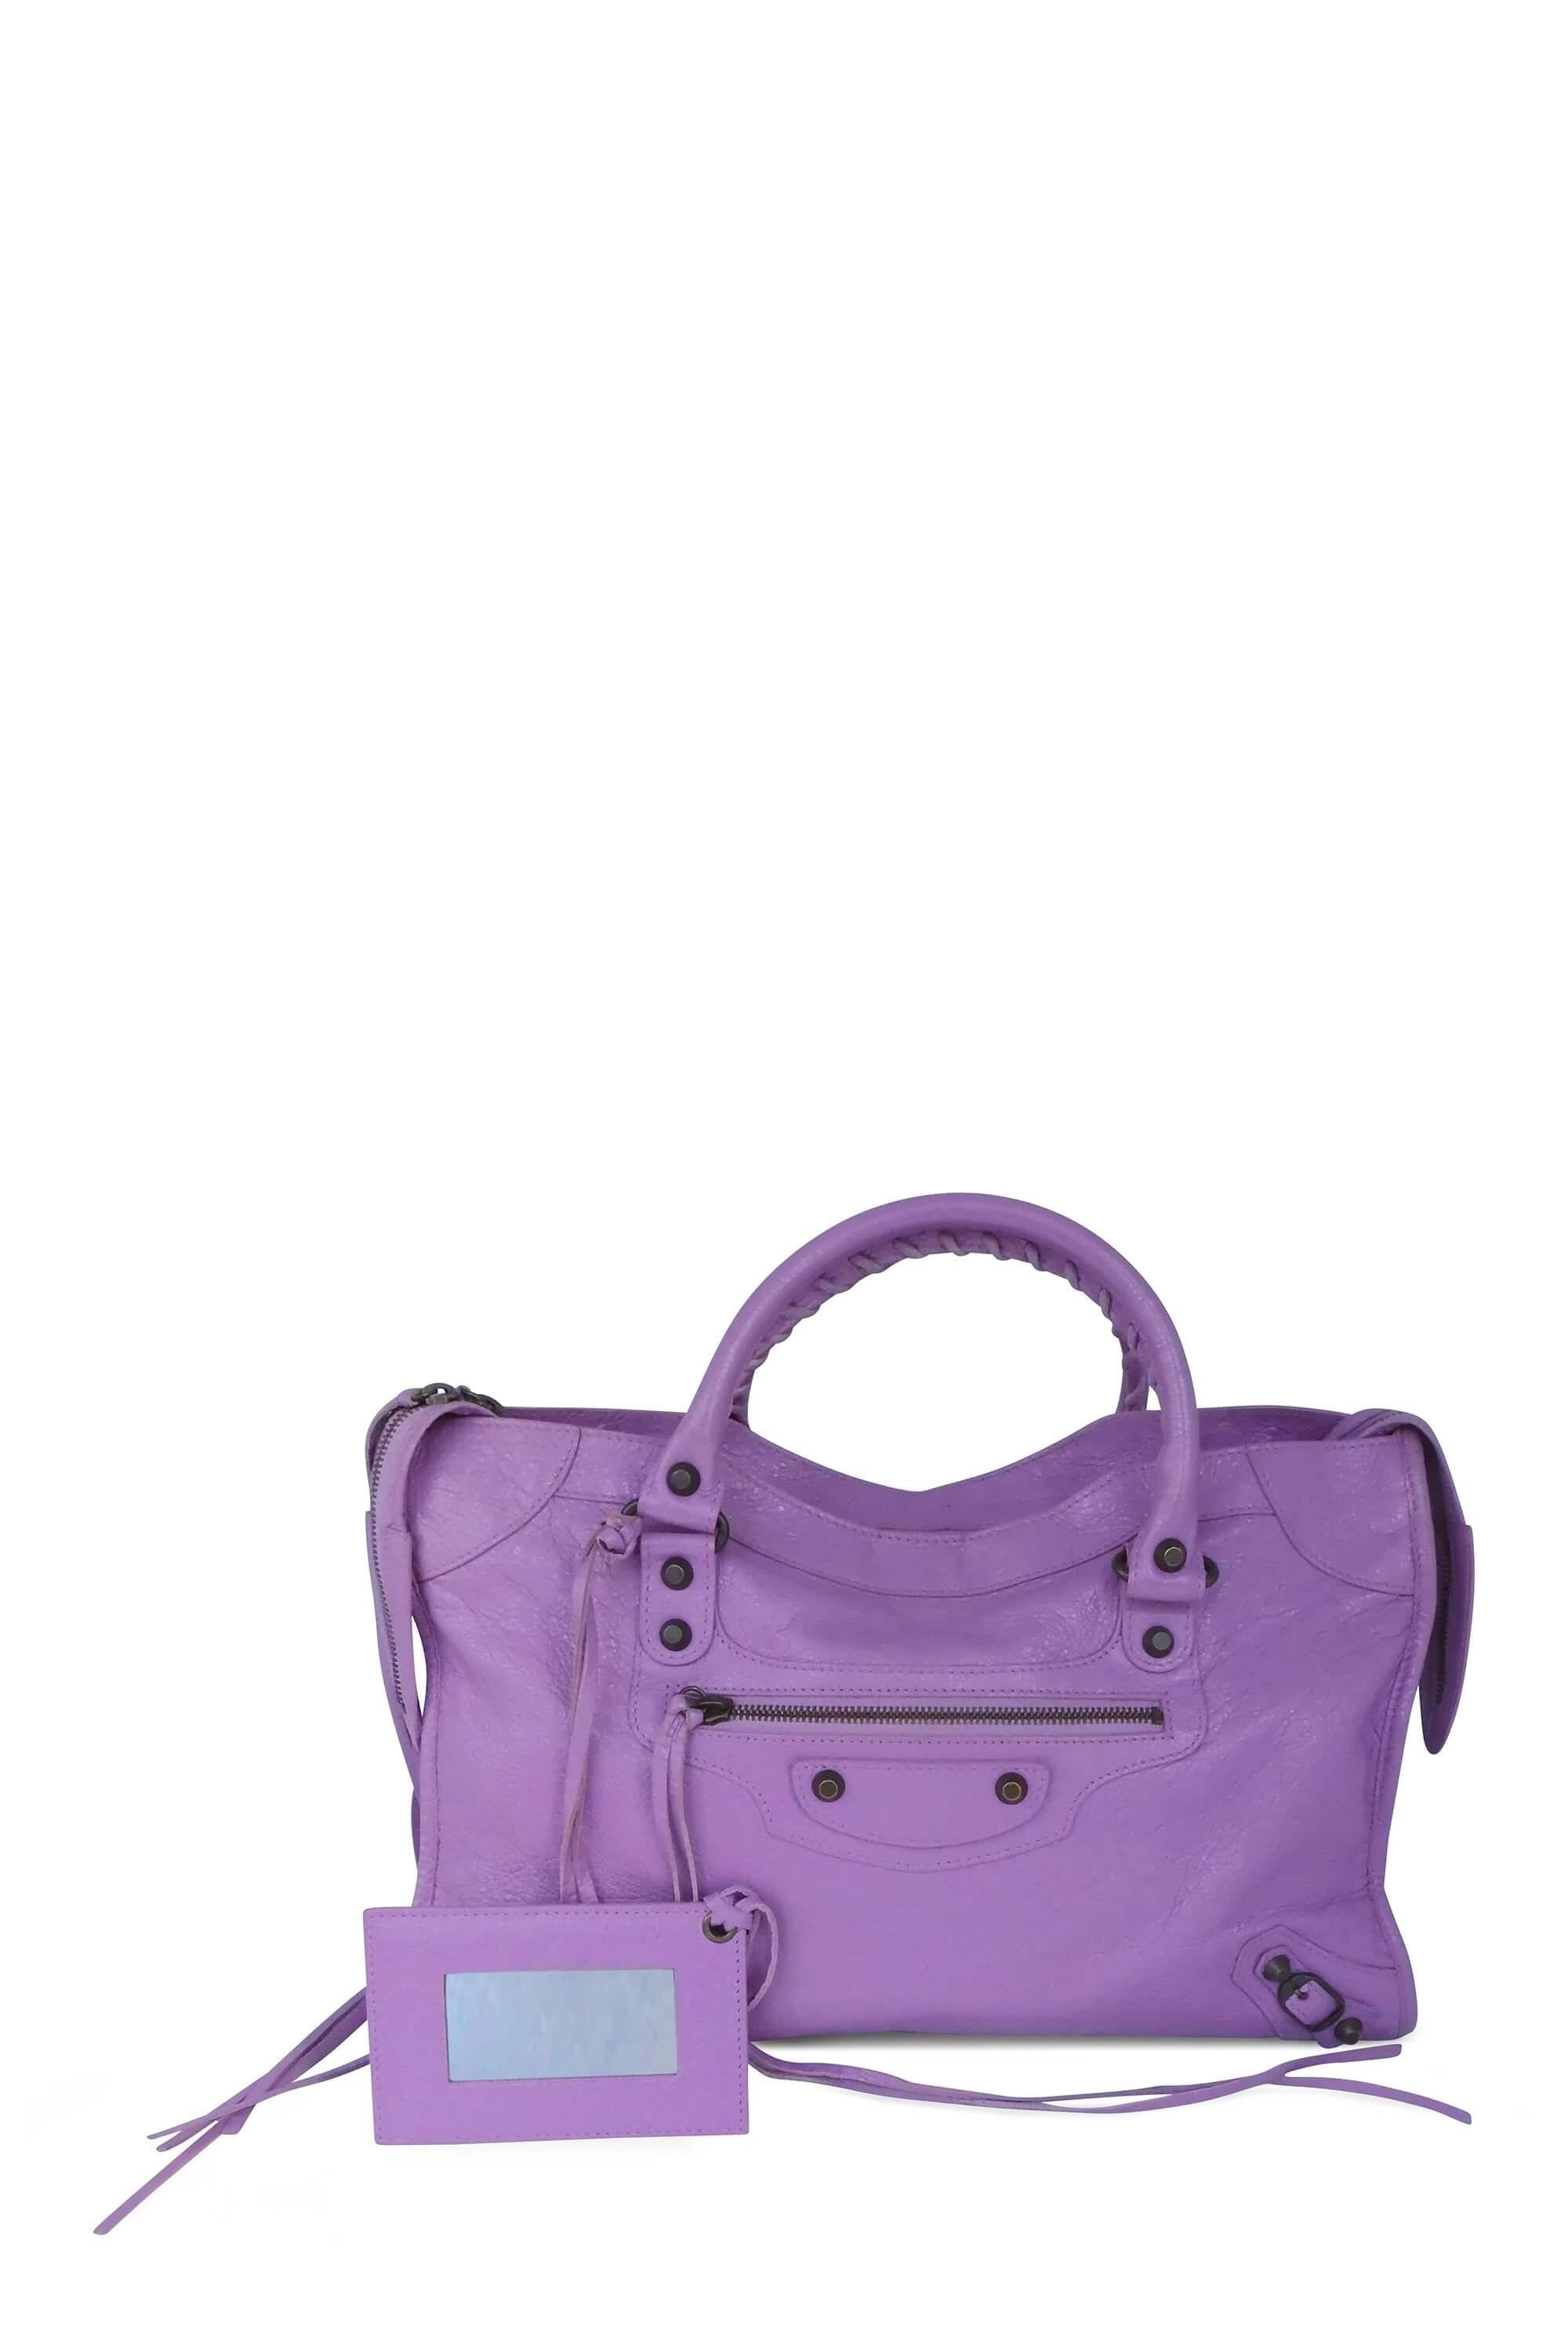 kort deres Dwell Buy Authentic, Preloved Balenciaga Classic City Bag Lilac Bags from Second  Edit by Style Theory